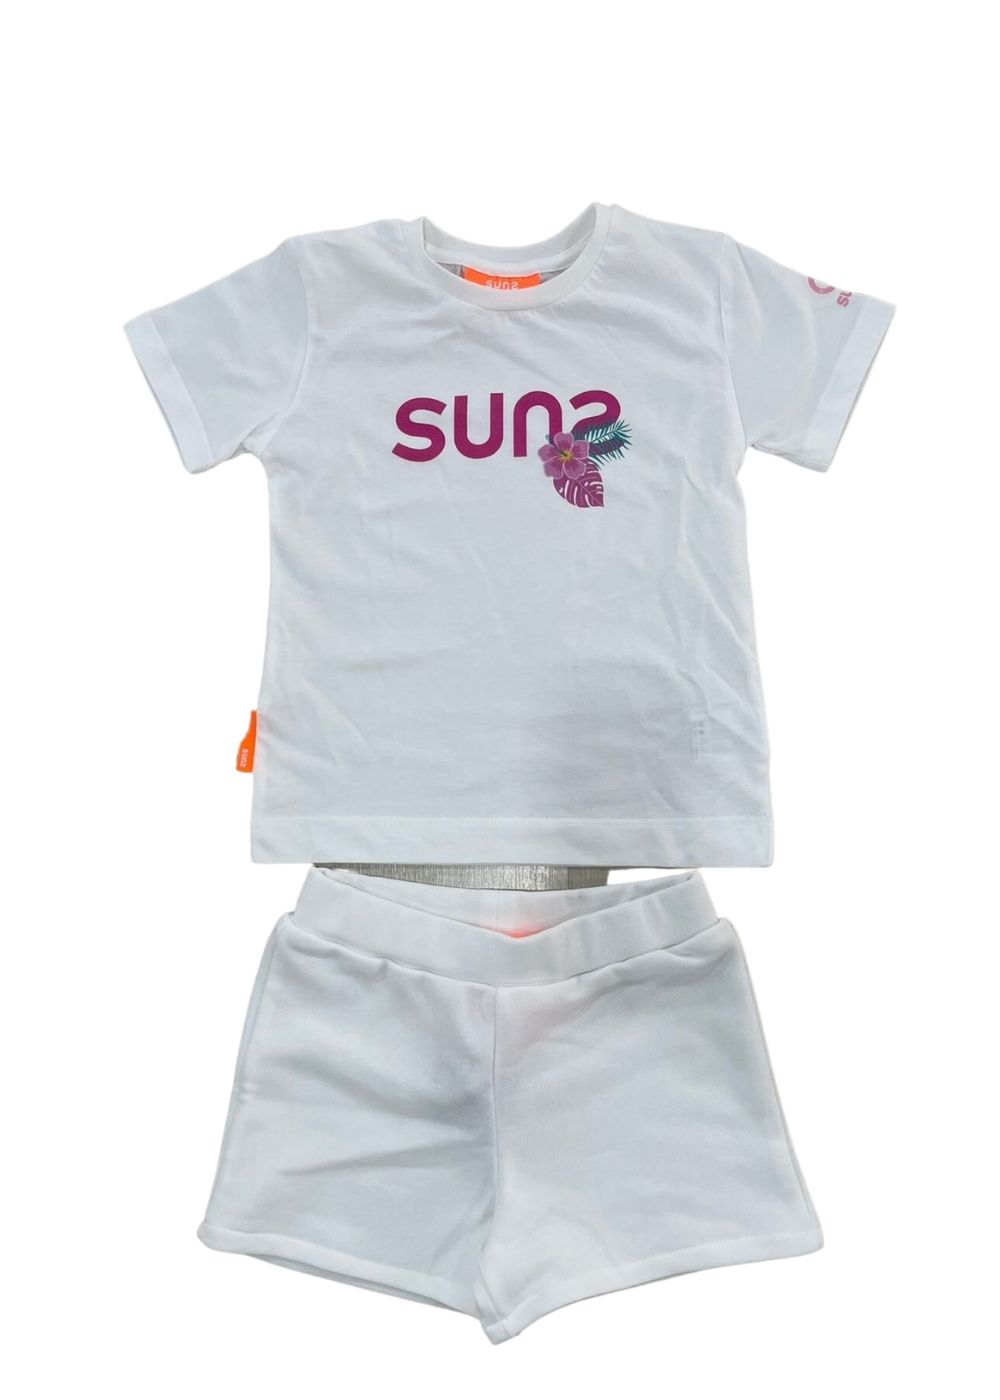 Featured image for “Suns Completo T-shirt e short”